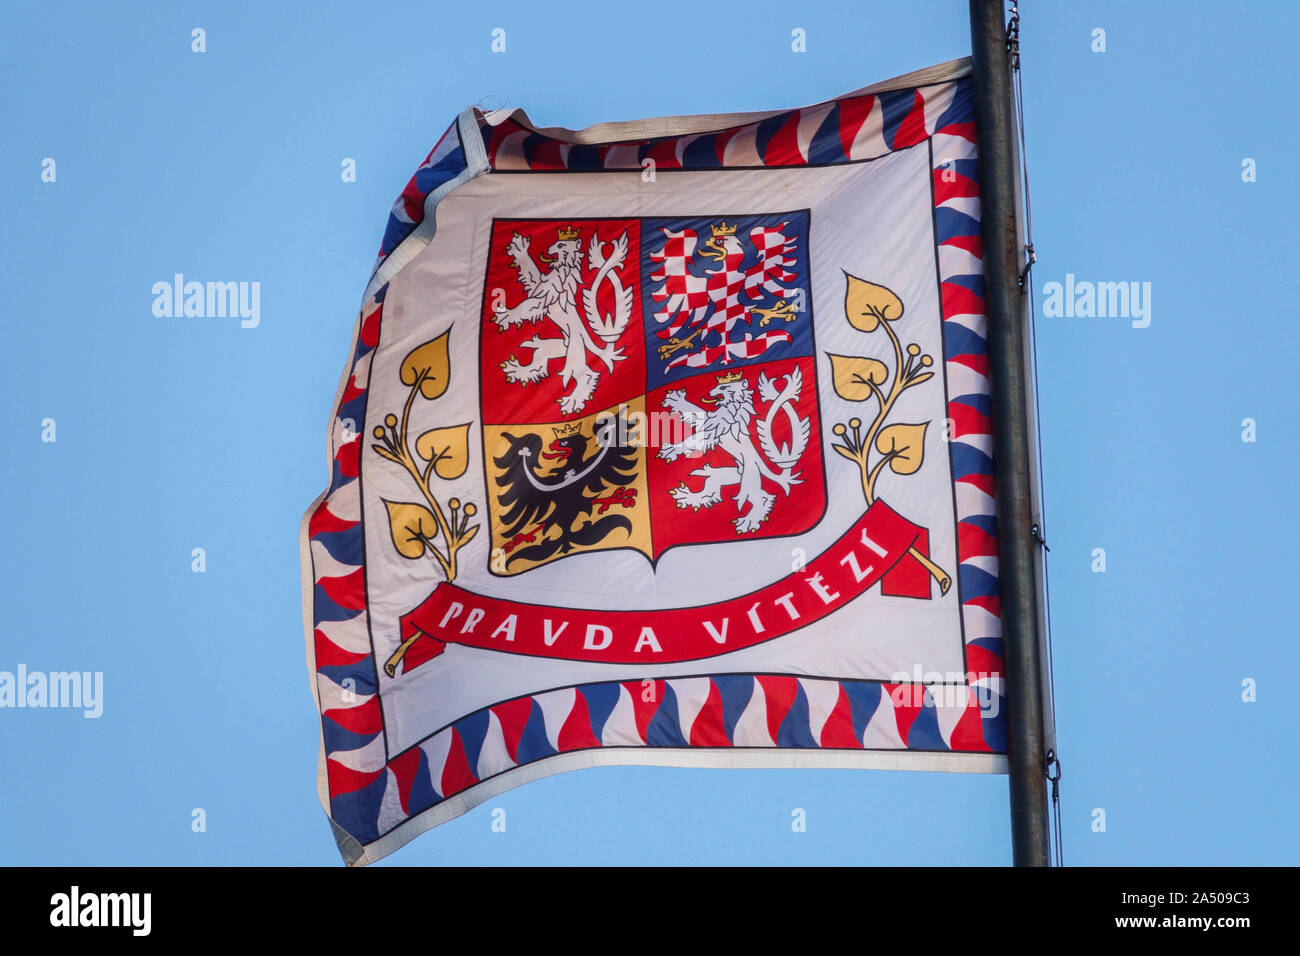 Heraldic coats of arms on the flag of the President, Czech lion, Moravian and Silesian eagle, flies at Prague Castle Czech Republic Stock Photo